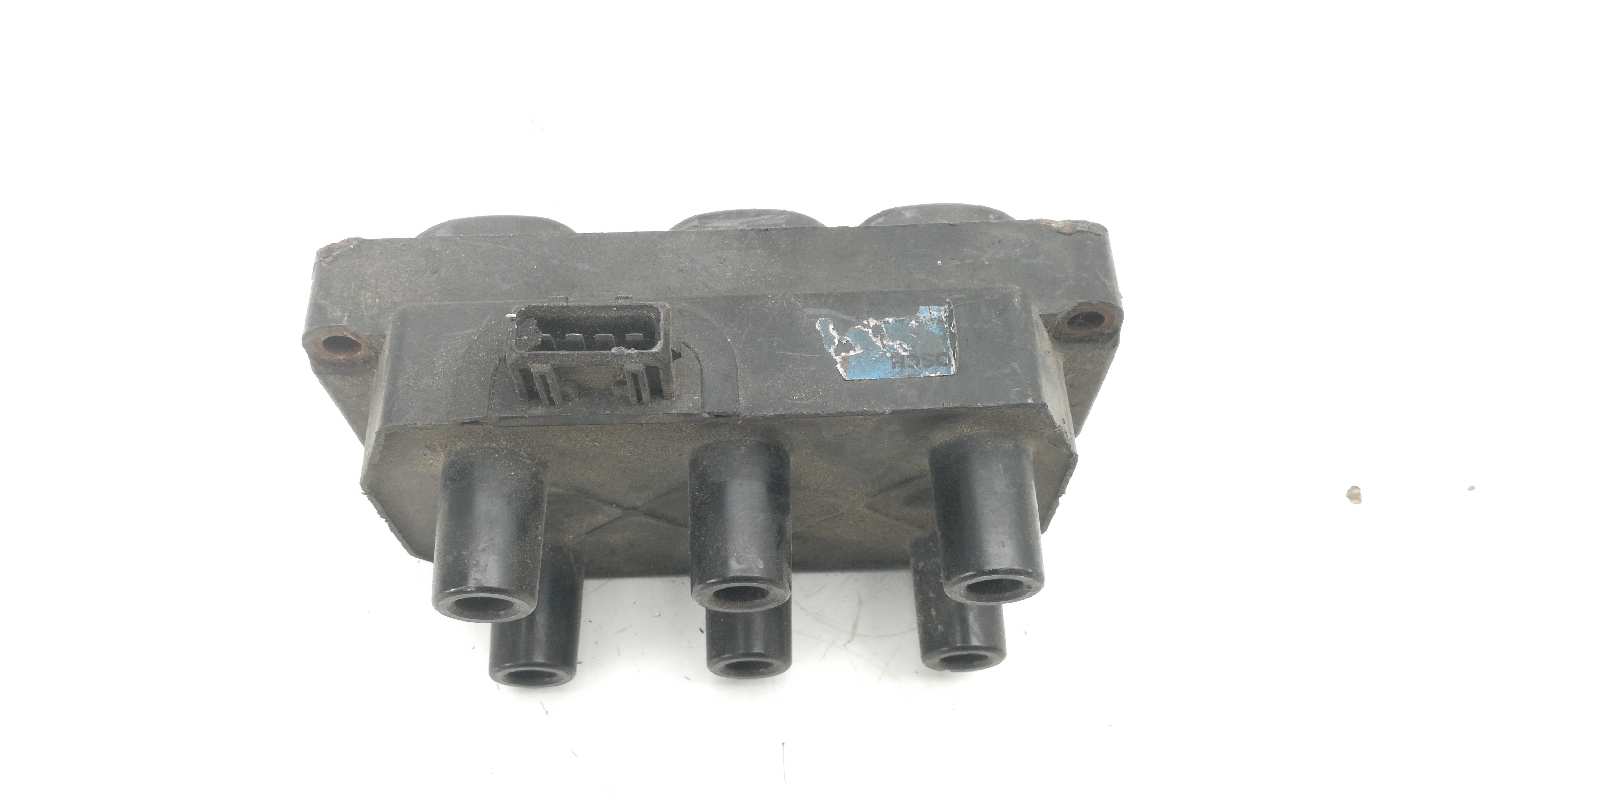 OPEL Vectra A (1988-1995) High Voltage Ignition Coil 0221503002 18496139